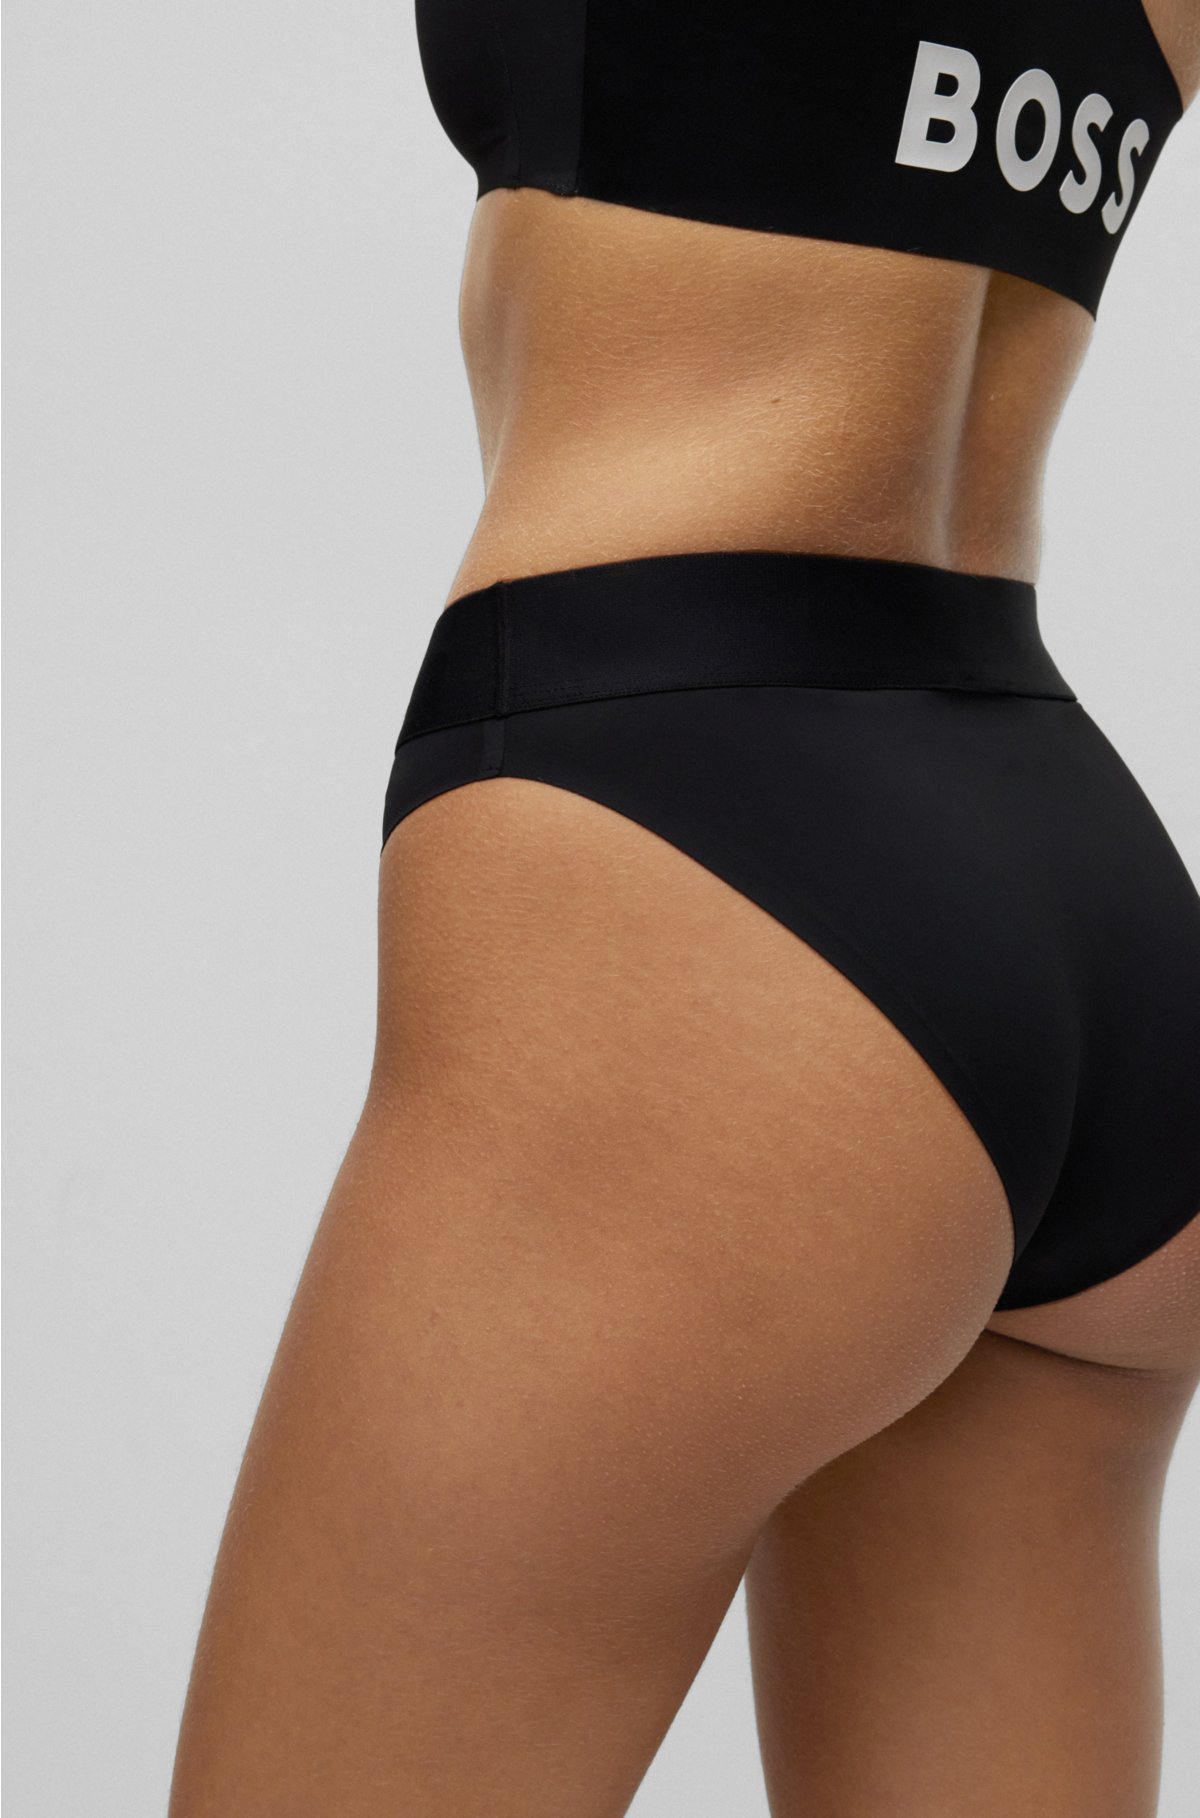 BOSS - High-waisted briefs with contrast logo